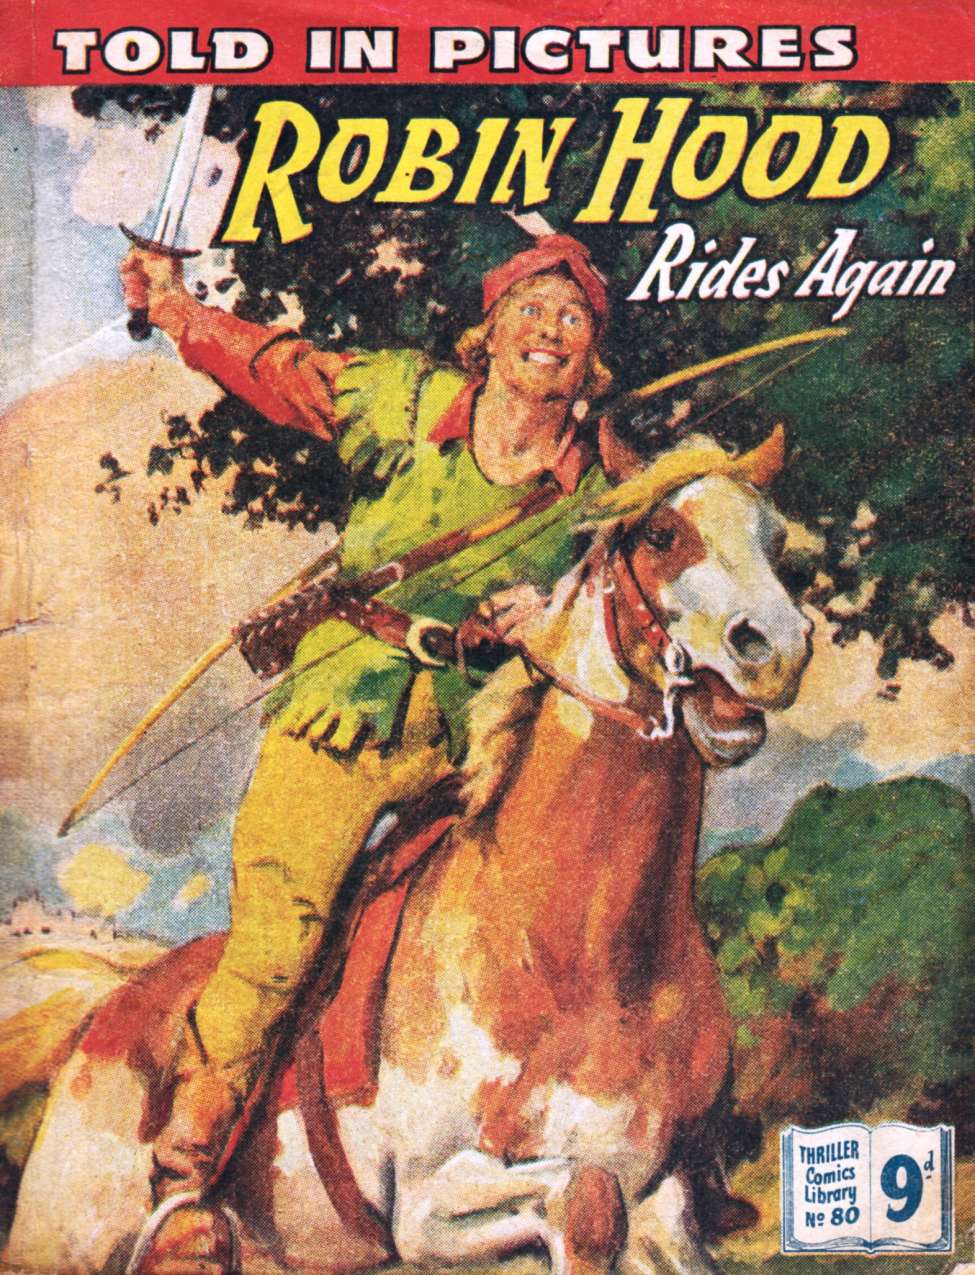 Book Cover For Thriller Comics Library 80 - Robin Hood Rides Again